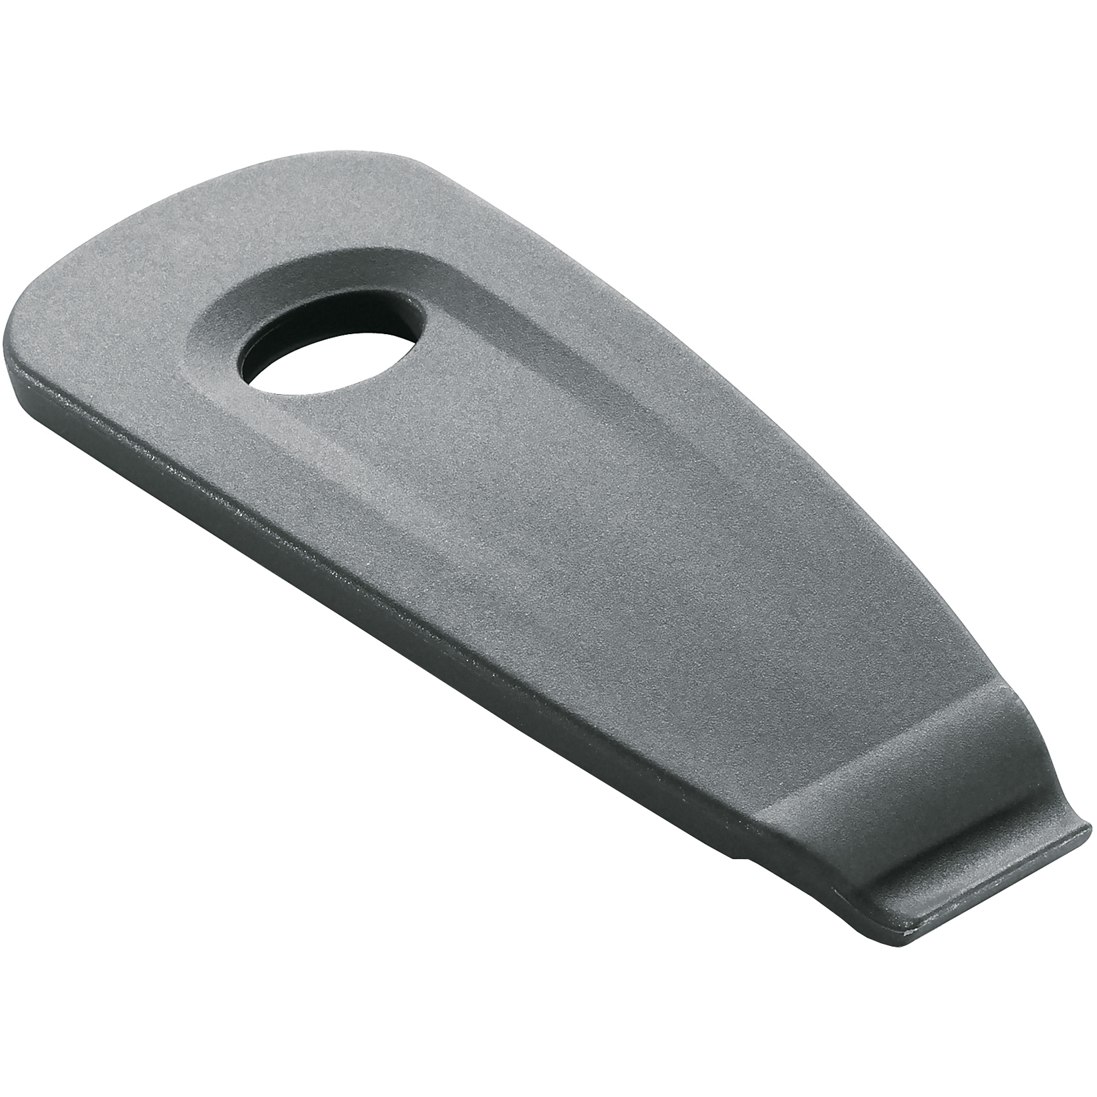 Picture of SKS Replacement Tire Lever for CT-Worx and T-Worx